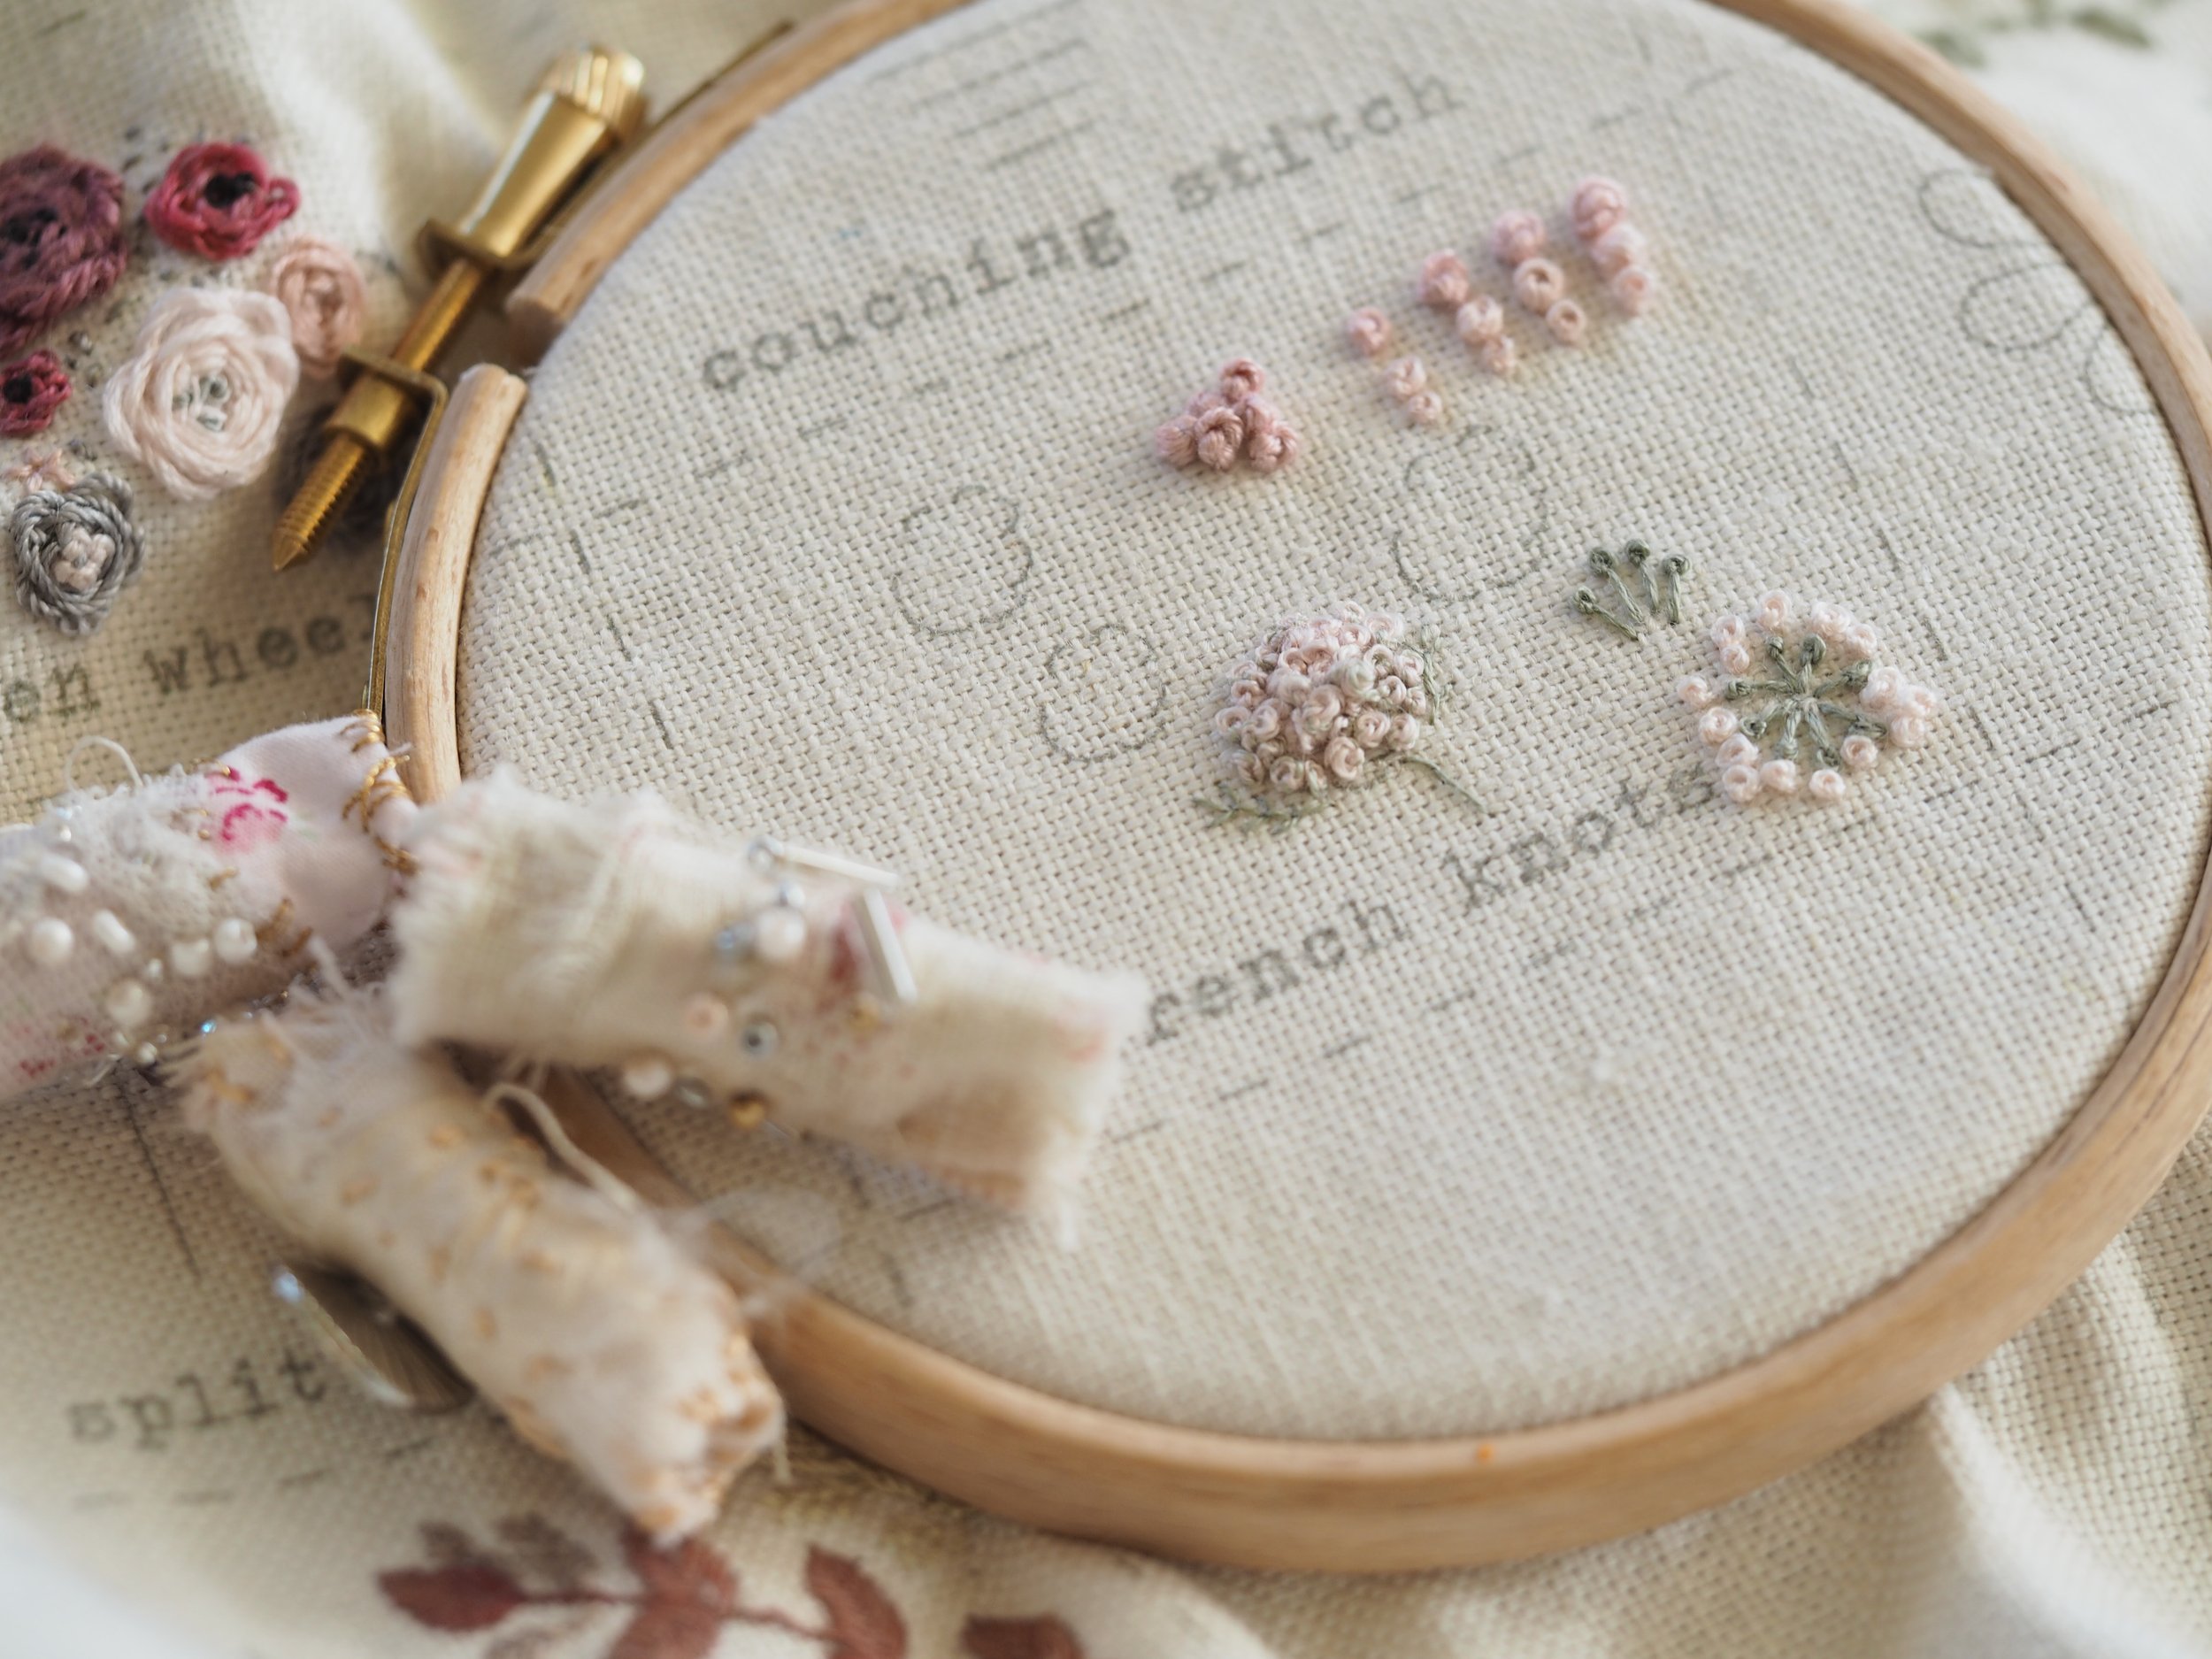 How to embroider a simple cross stitch lavender bag — Sum of their Stories  Craft Blog